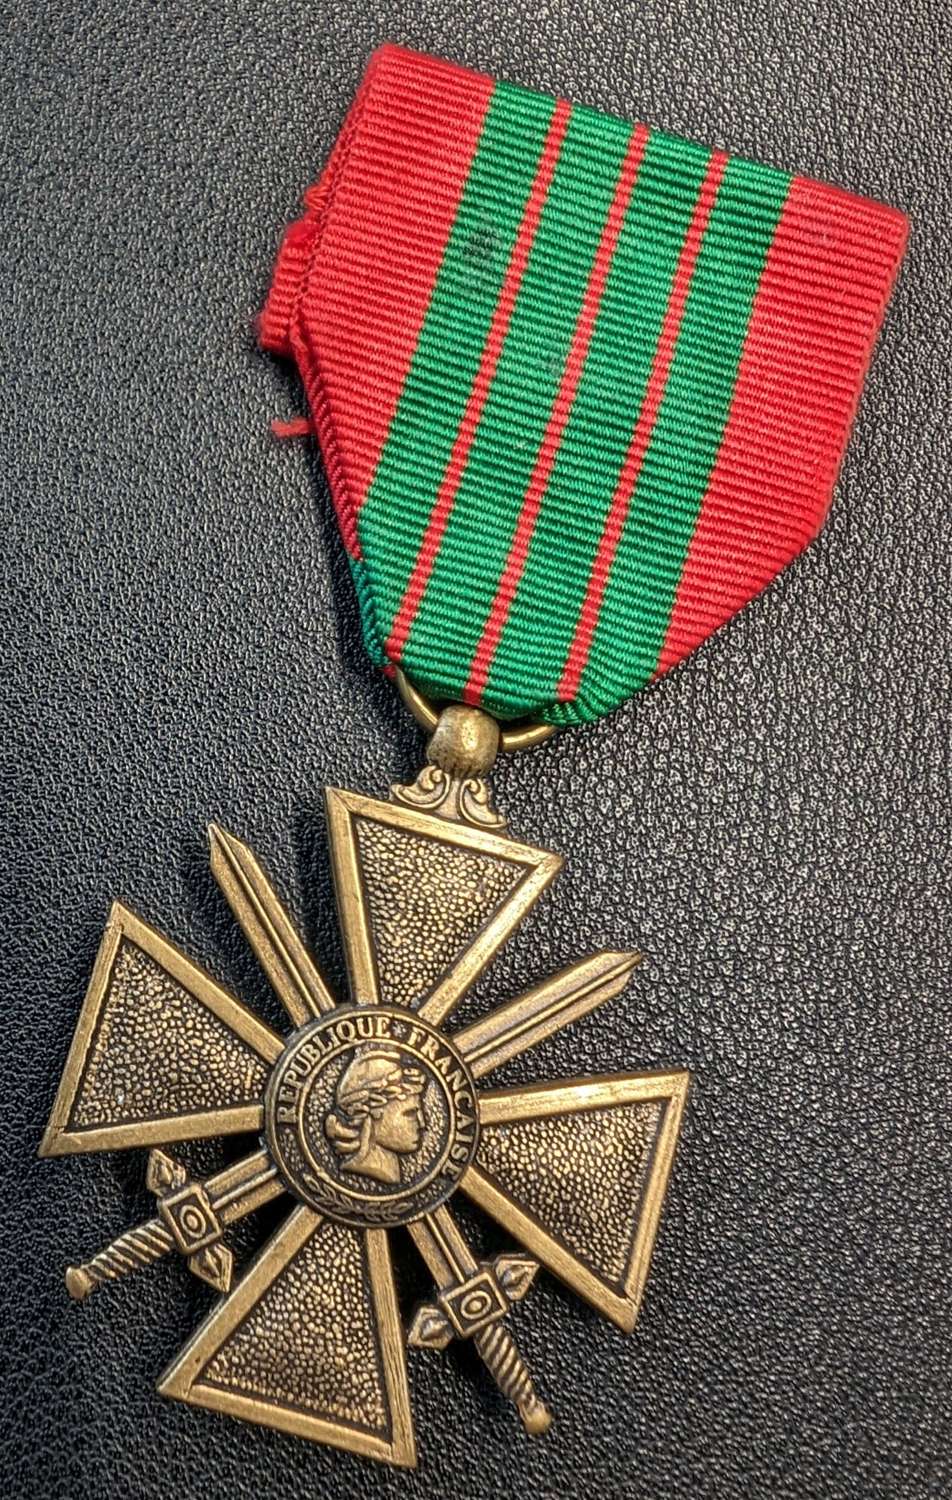 WWII French Croix De Guerre Medal 1939 - 1945